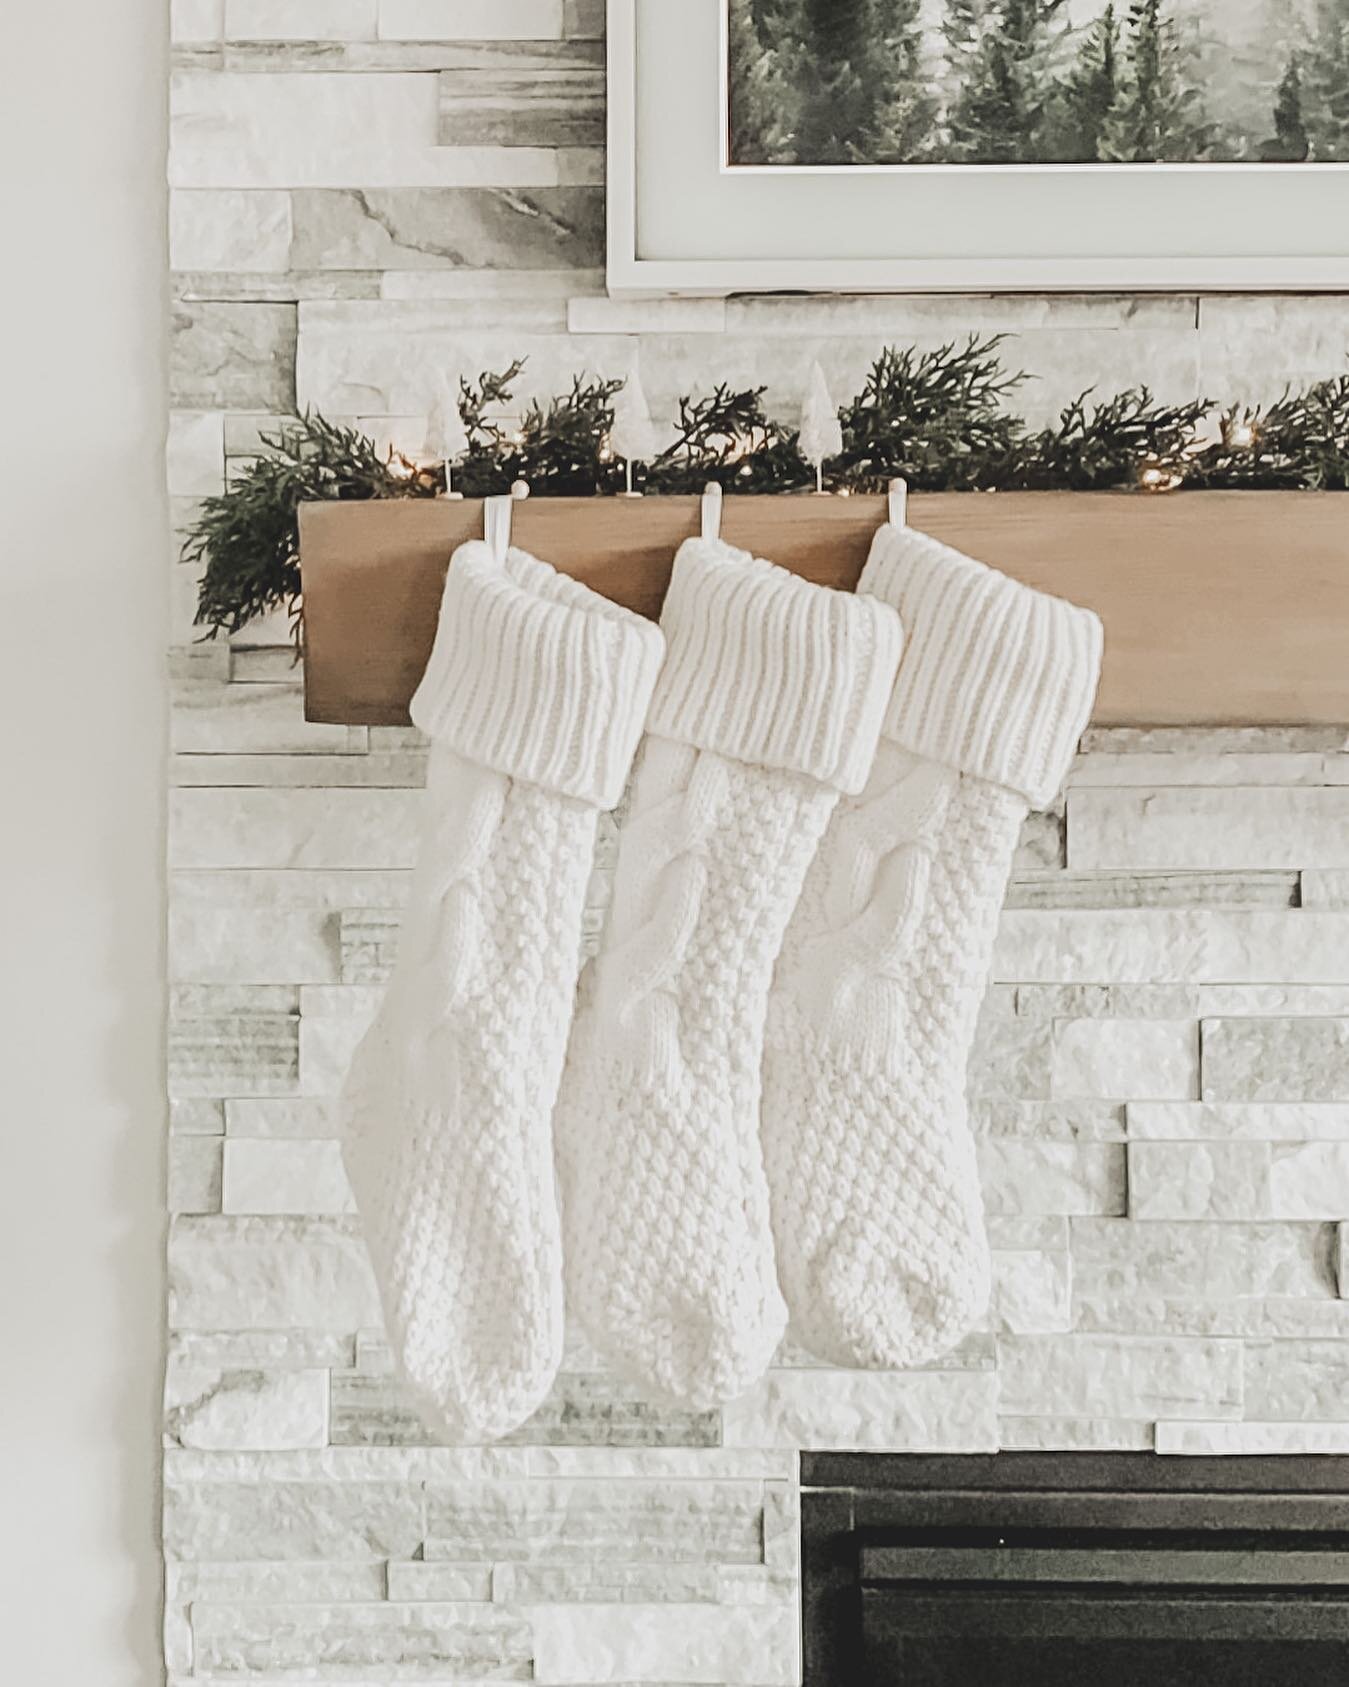 The stockings were hung by the chimney with care... 🎅🏻 ⁣
⁣
#christmasdecor ⁣
#christmashometour⁣
#christmasdecorations ⁣
#christmashomedecor ⁣
#holidayhomedecor ⁣
#interiormilk⁣
#thedecortribe ⁣
#scandinavianhome ⁣
#ipsyraddesign ⁣
#mymidcenturymix